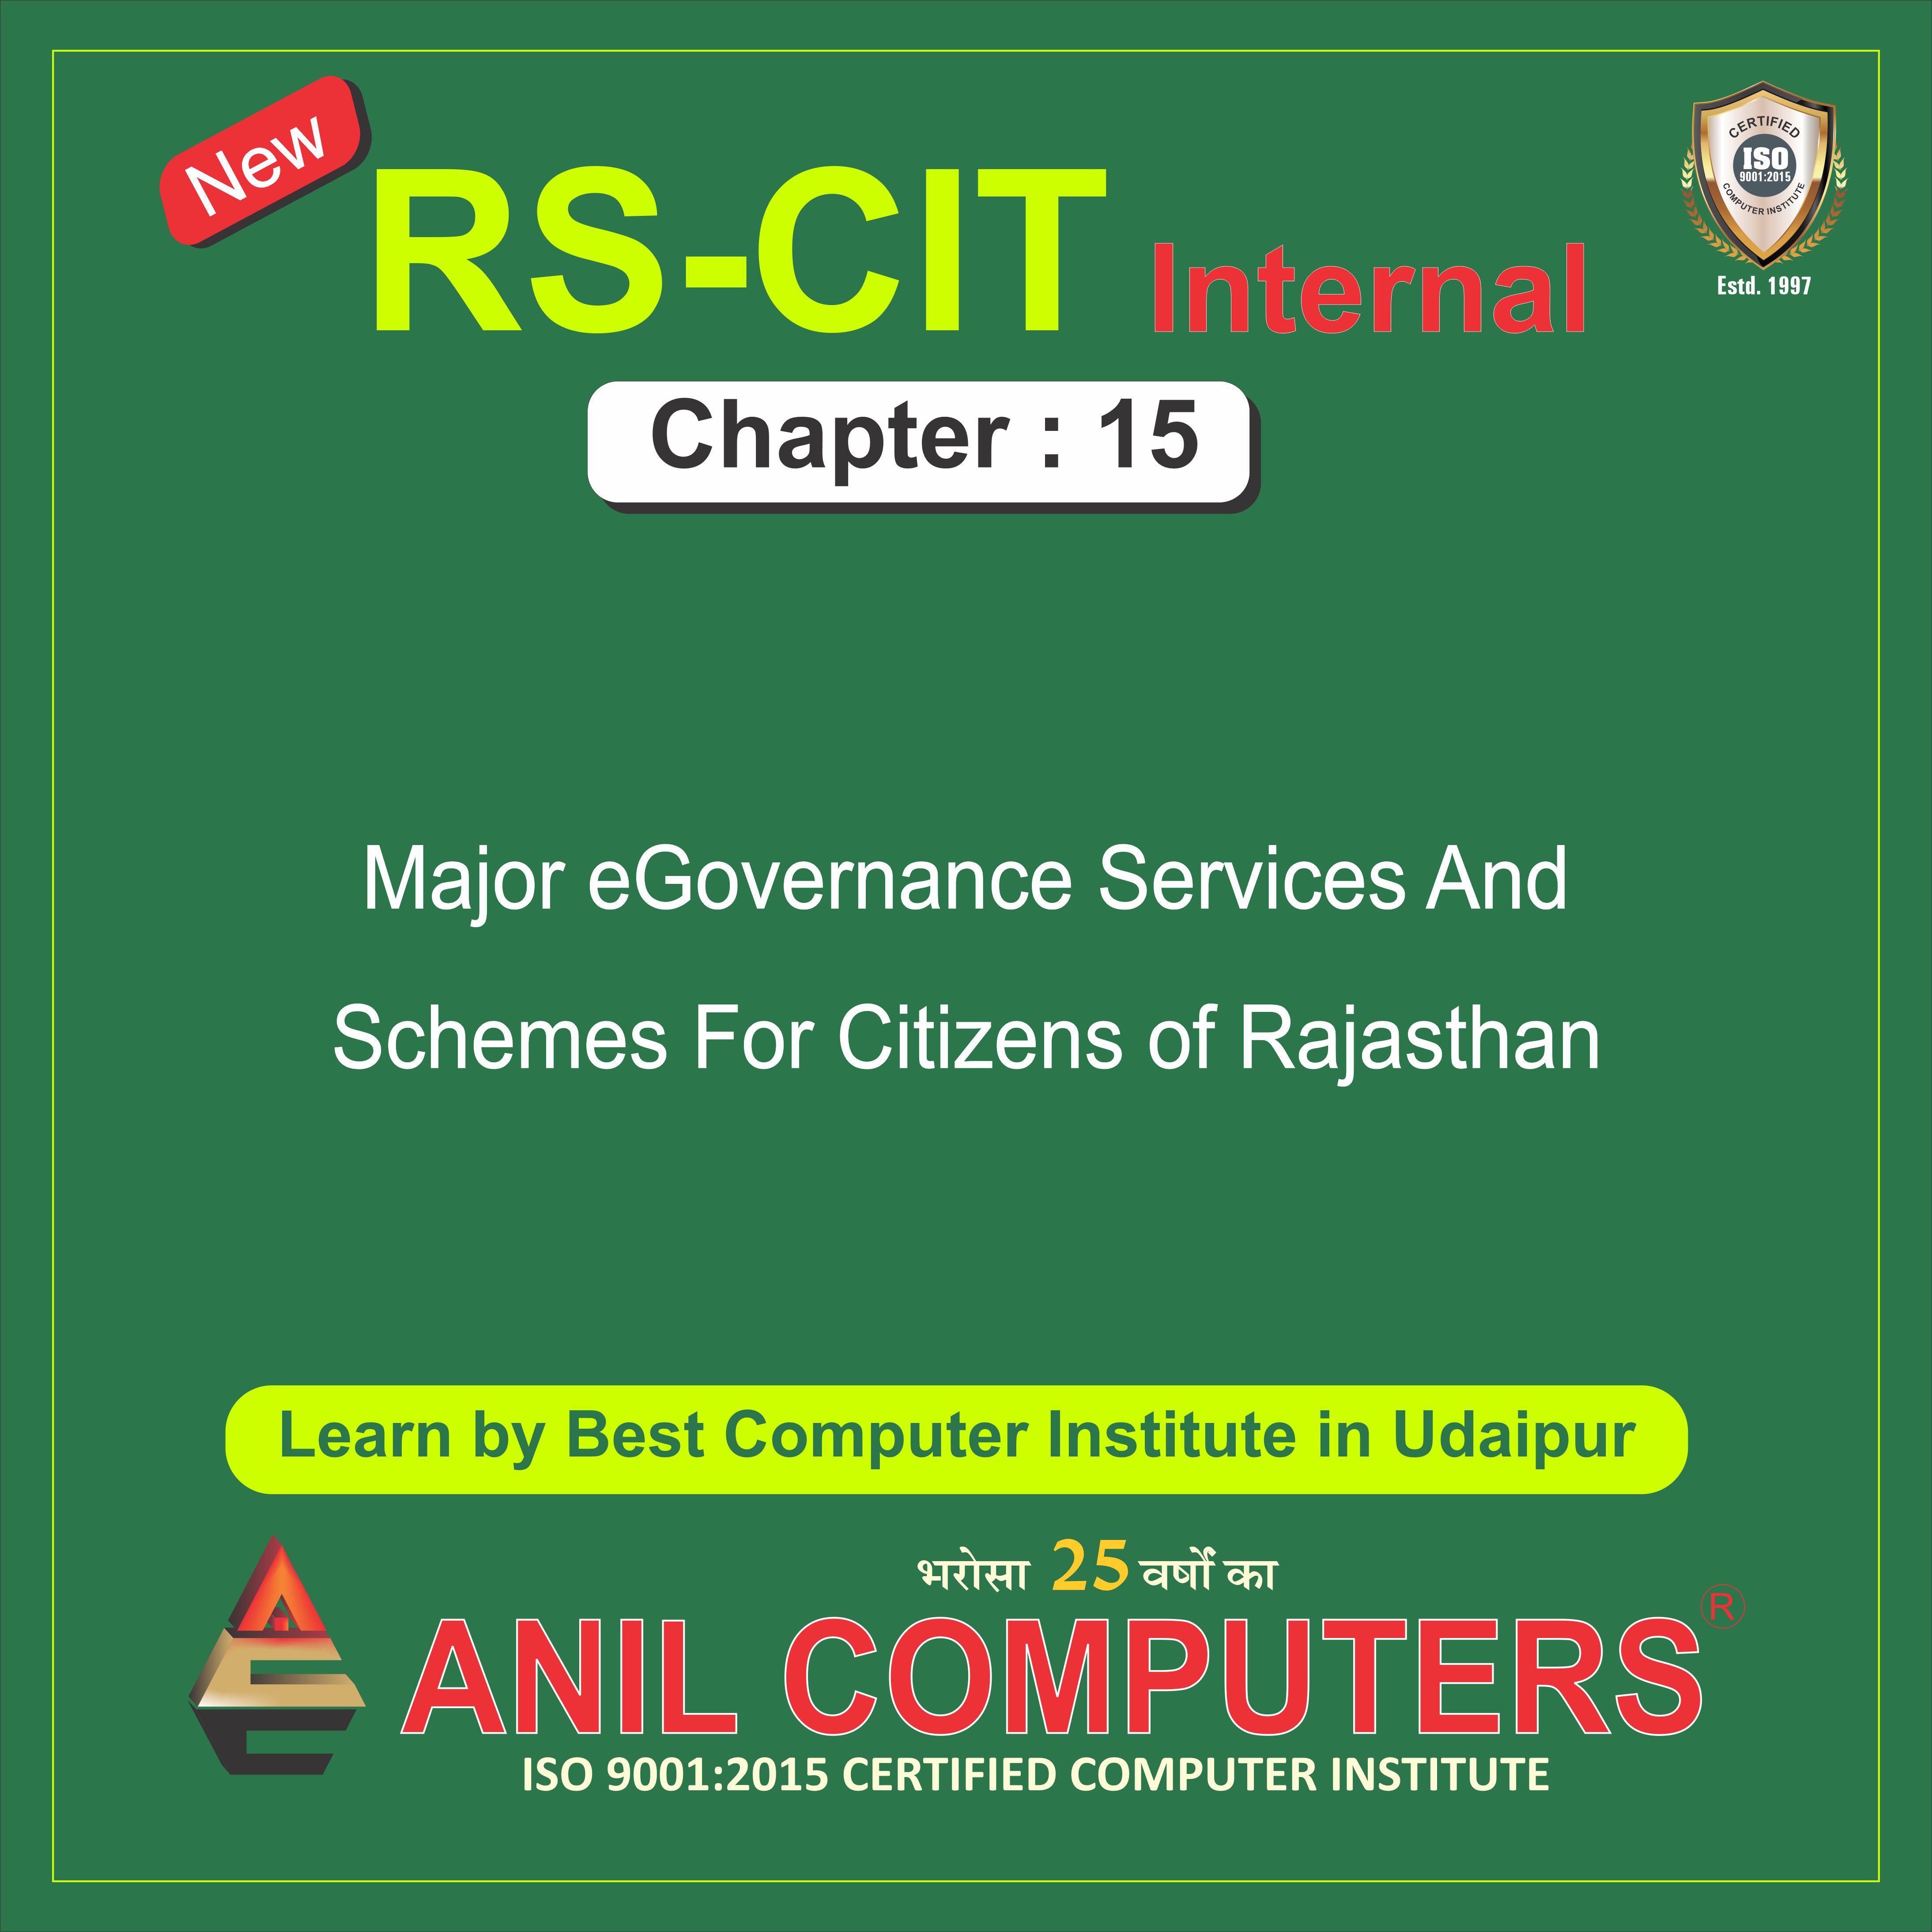 Chapter 15 Major eGovernance Services And Schemes For Citizens of Rajasthan New